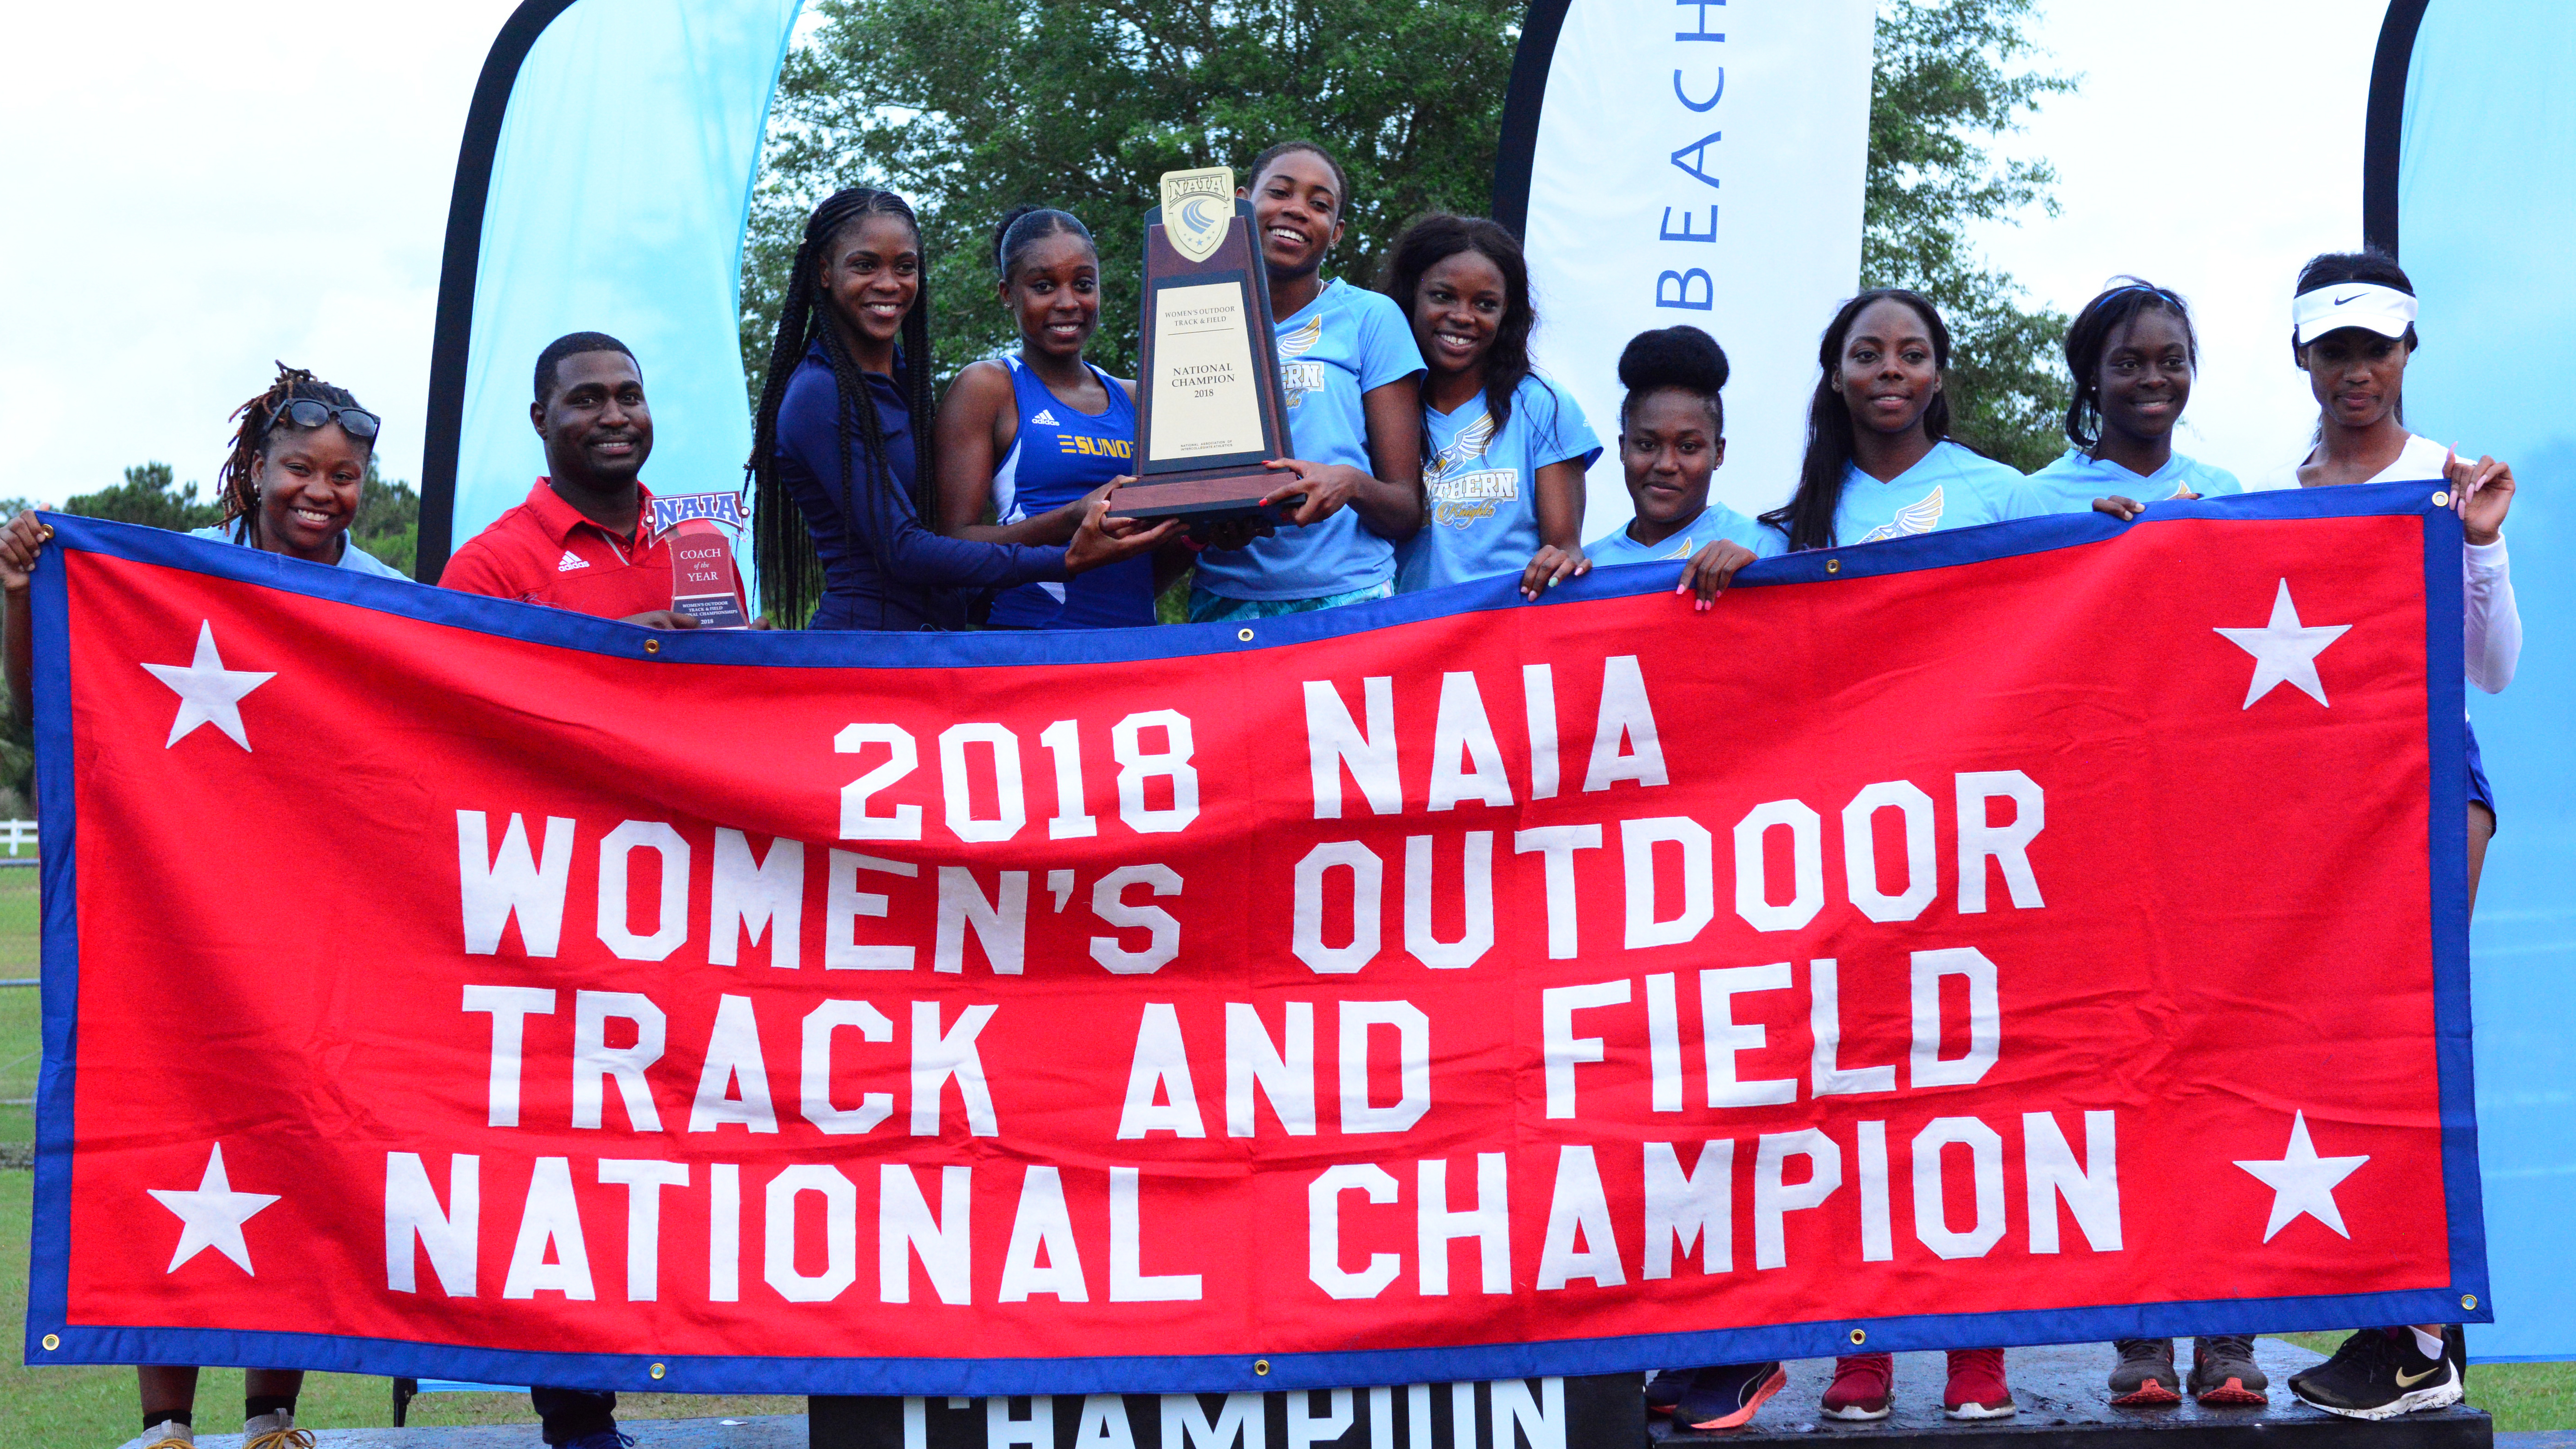 Southern (La.) Wins Third Outdoor Track & Field National Championship